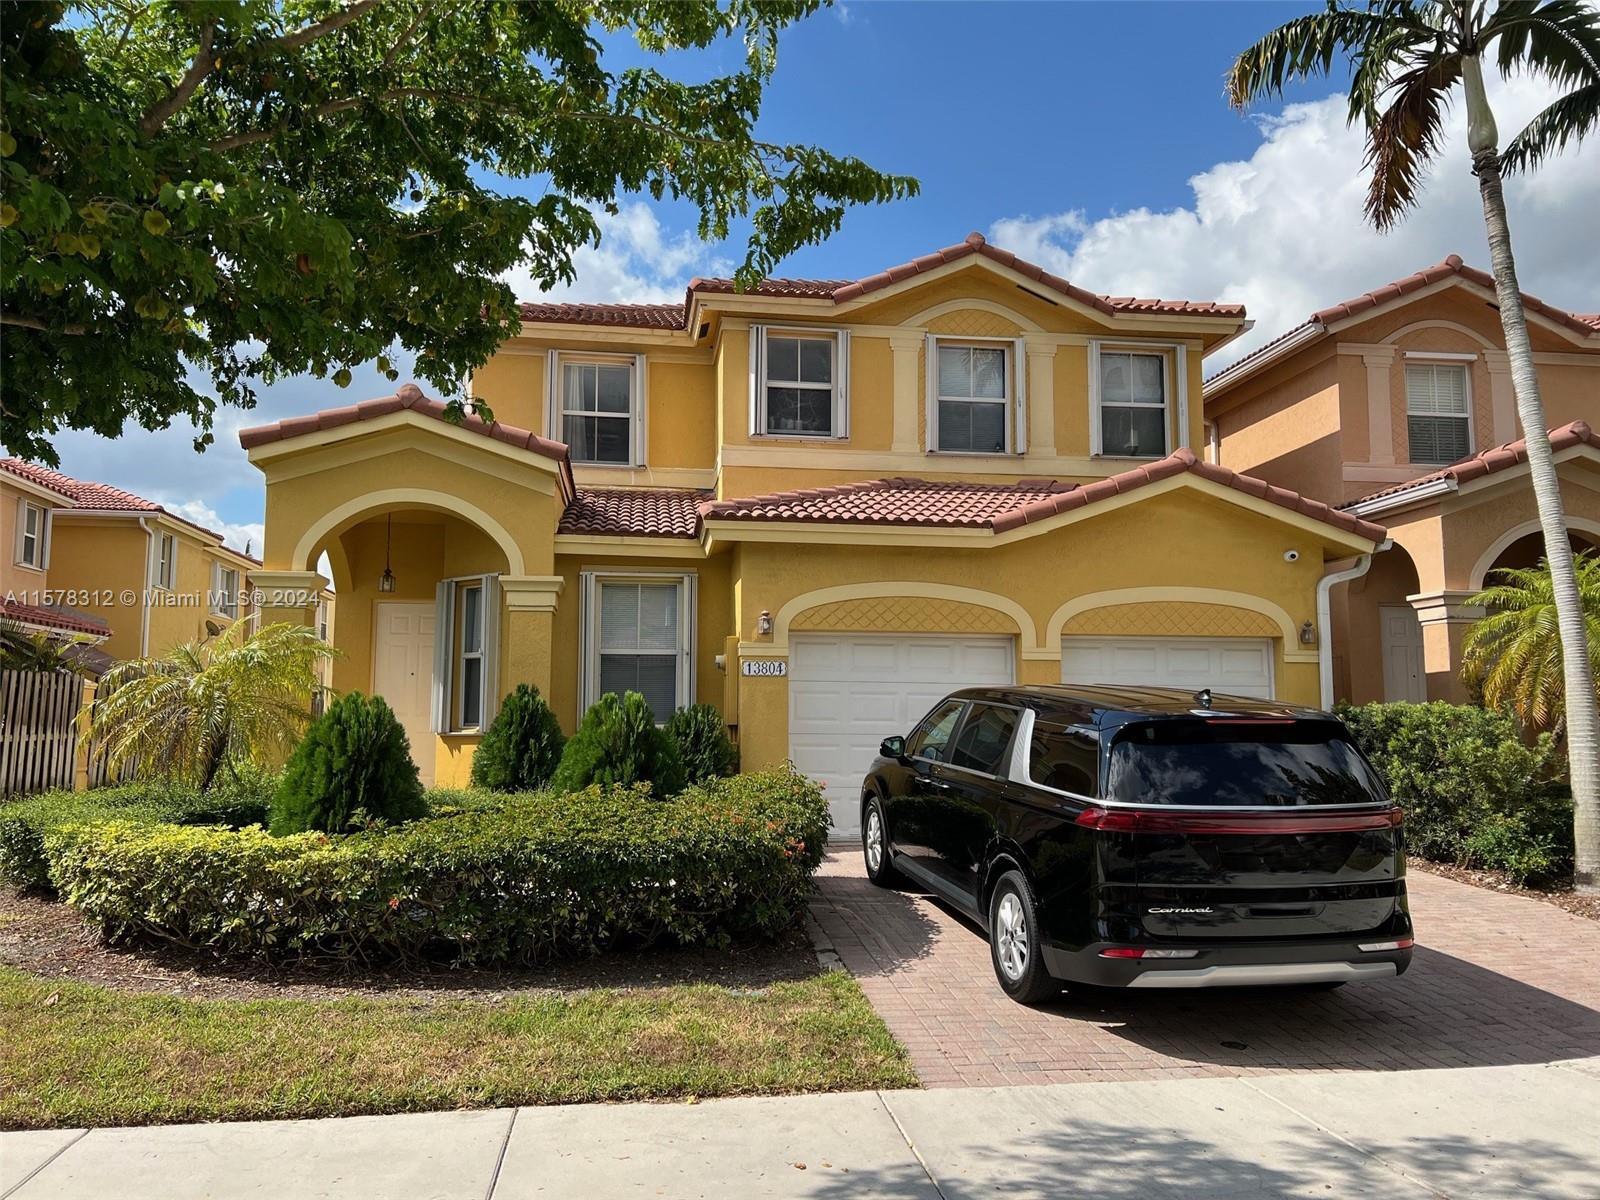 Property for Sale at 13804 Sw 114th Ter Ter, Miami, Broward County, Florida - Bedrooms: 4 
Bathrooms: 3  - $650,000